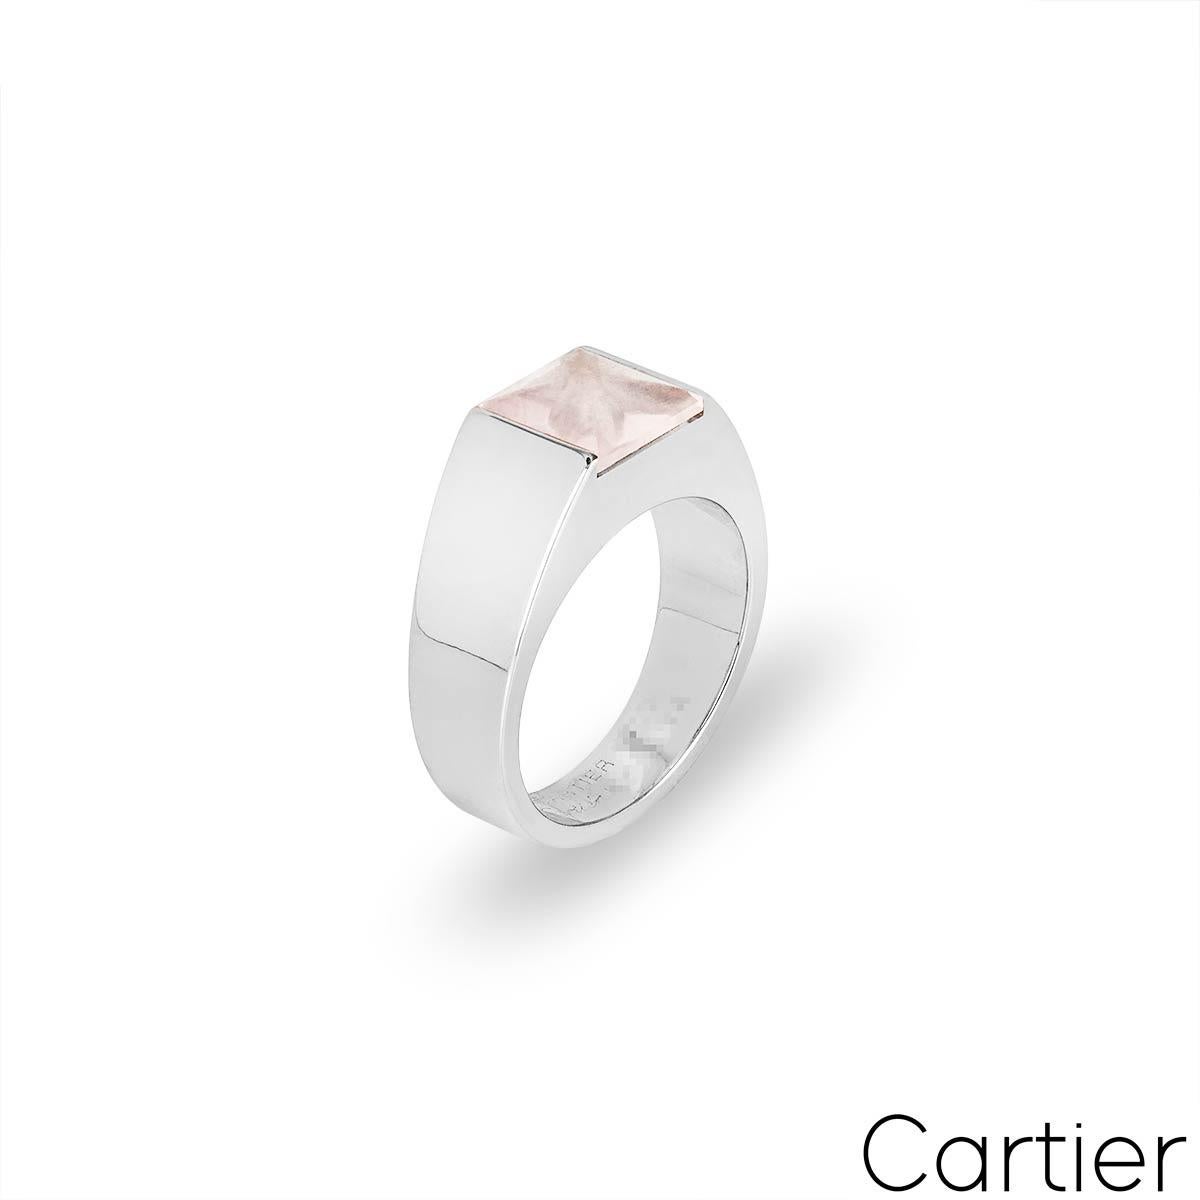 An 18k white gold ring from the Tank collection by Cartier. The ring is set to the centre with a square cut rose quartz in a tension setting. The ring measures 8mm in width tapering to 5mm, is a UK size N/ US size 7/ EU size 53 and has a gross